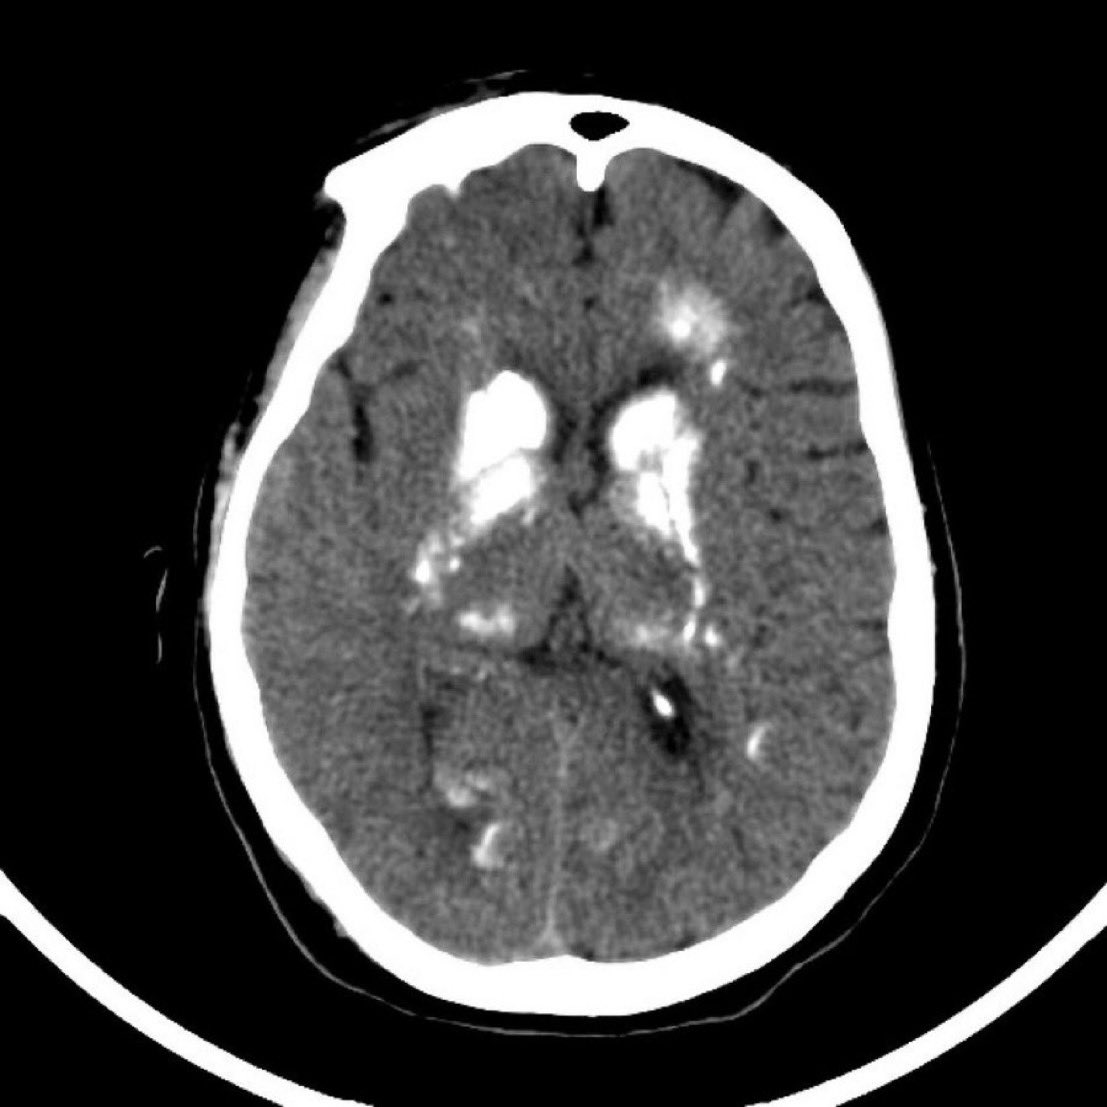 A 45 year old man presented with chronic headache and memory problems. Workup was largely unremarkable. A CT scan was done. What is the likely diagnosis? (Image @Radiopaedia, case by Ahmed Faaz Nasser) #Neurology